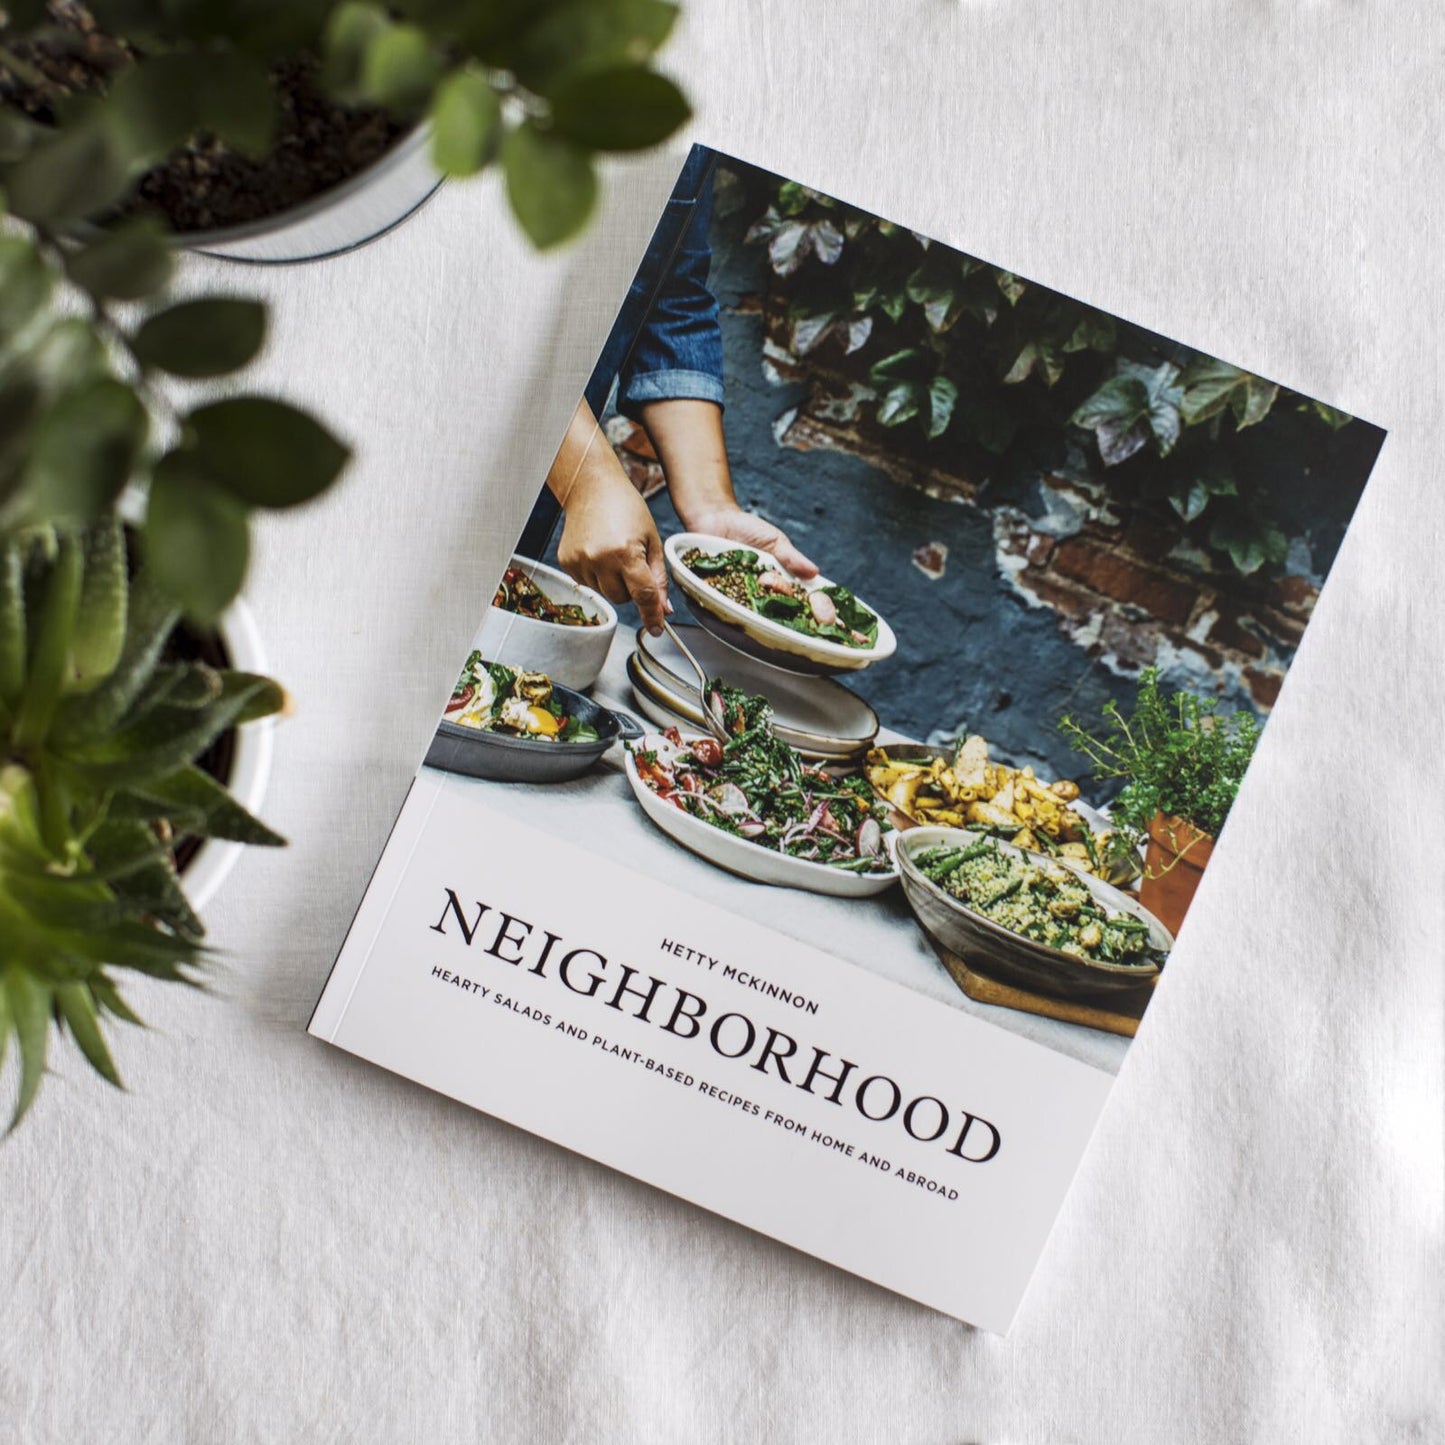 BOOKS & CO - NEIGHBOURHOOD -  Salad, sweets and stories from home and abroad